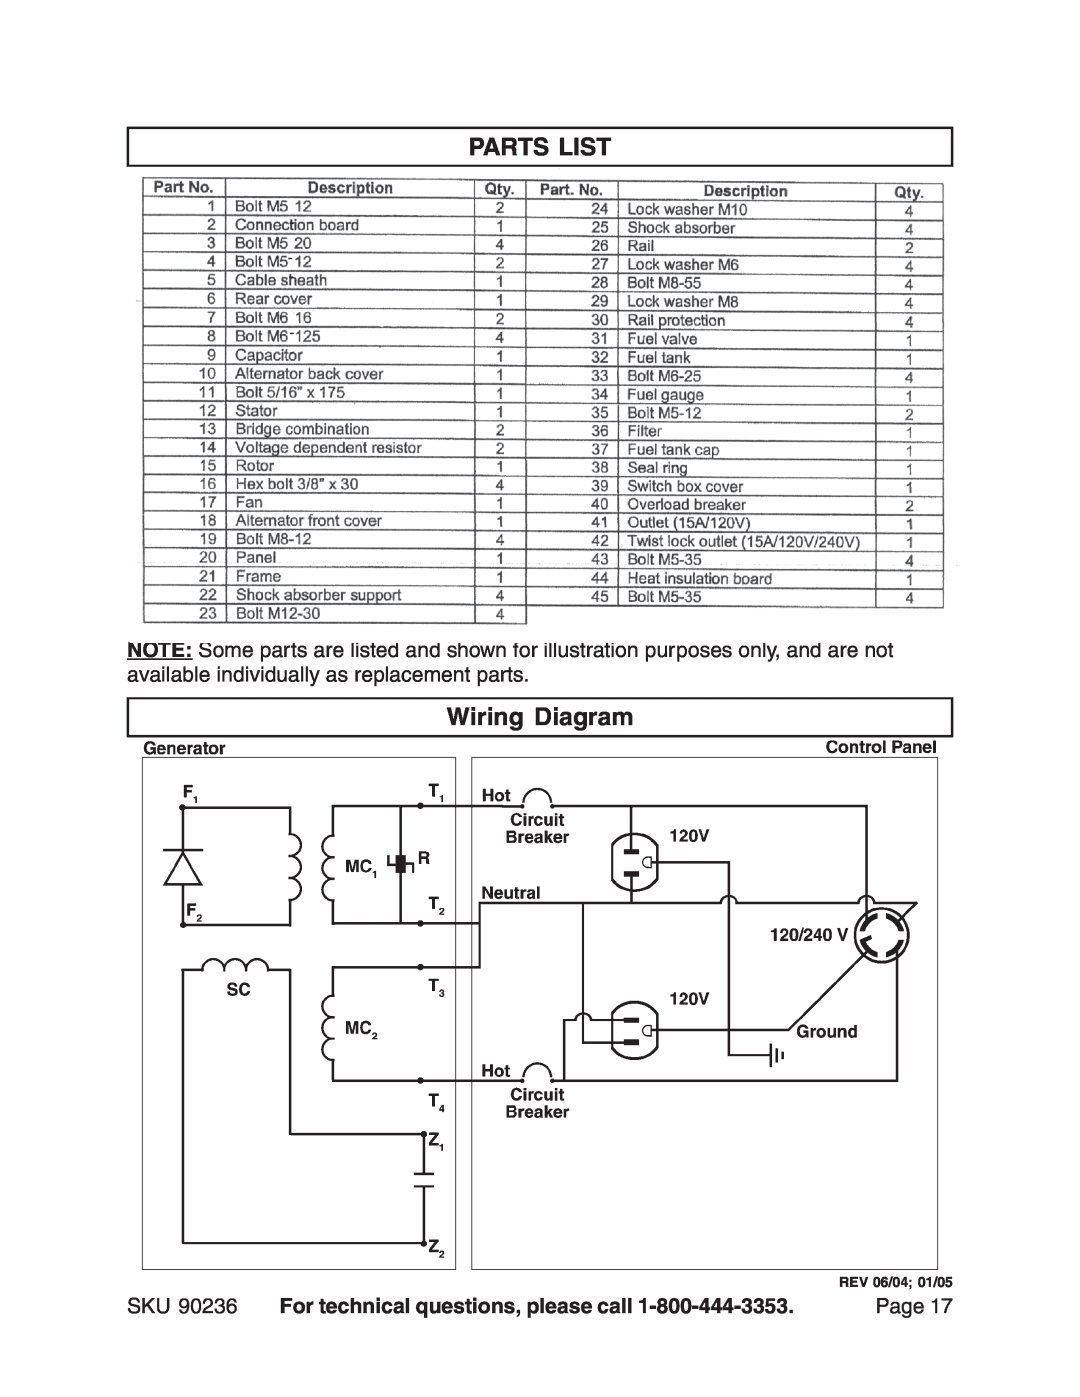 Chicago Electric 90236 manual Parts List, Wiring Diagram, For technical questions, please call, Page, REV 06/04 01/05 